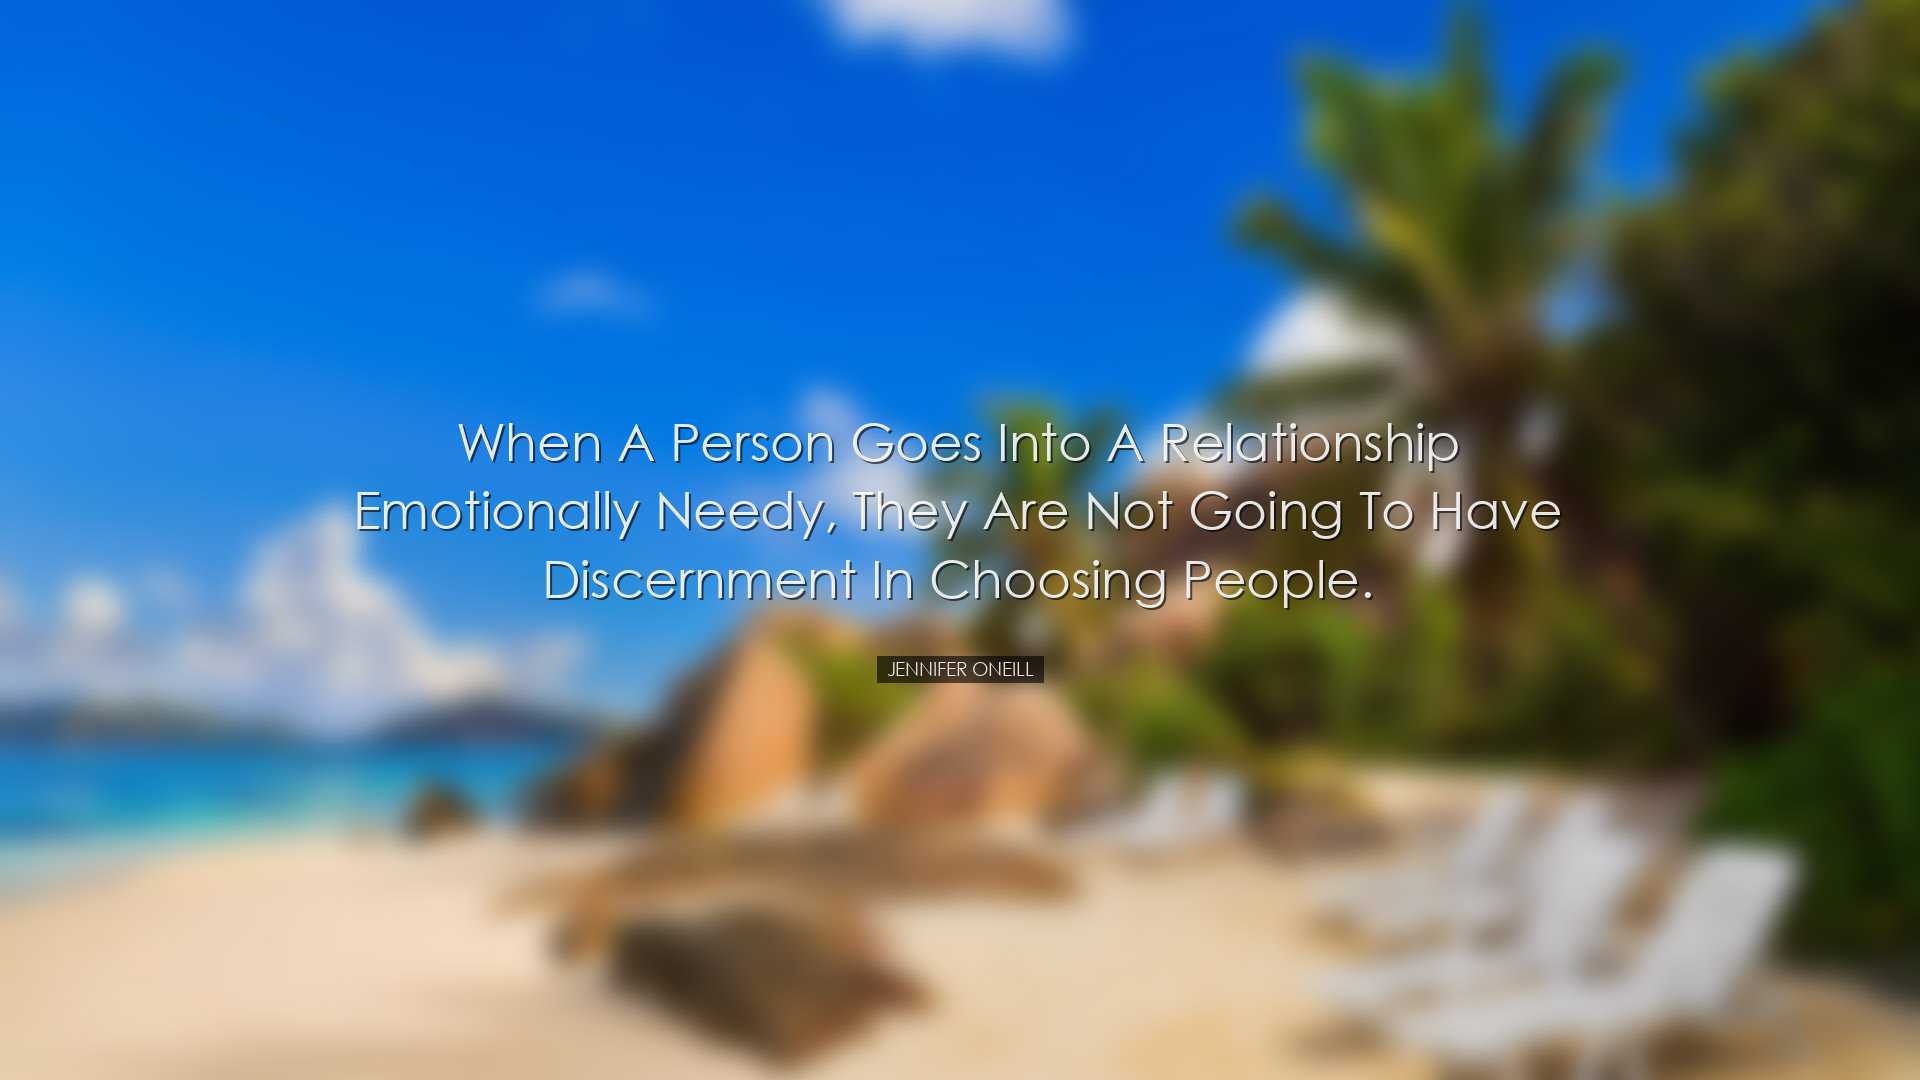 When a person goes into a relationship emotionally needy, they are